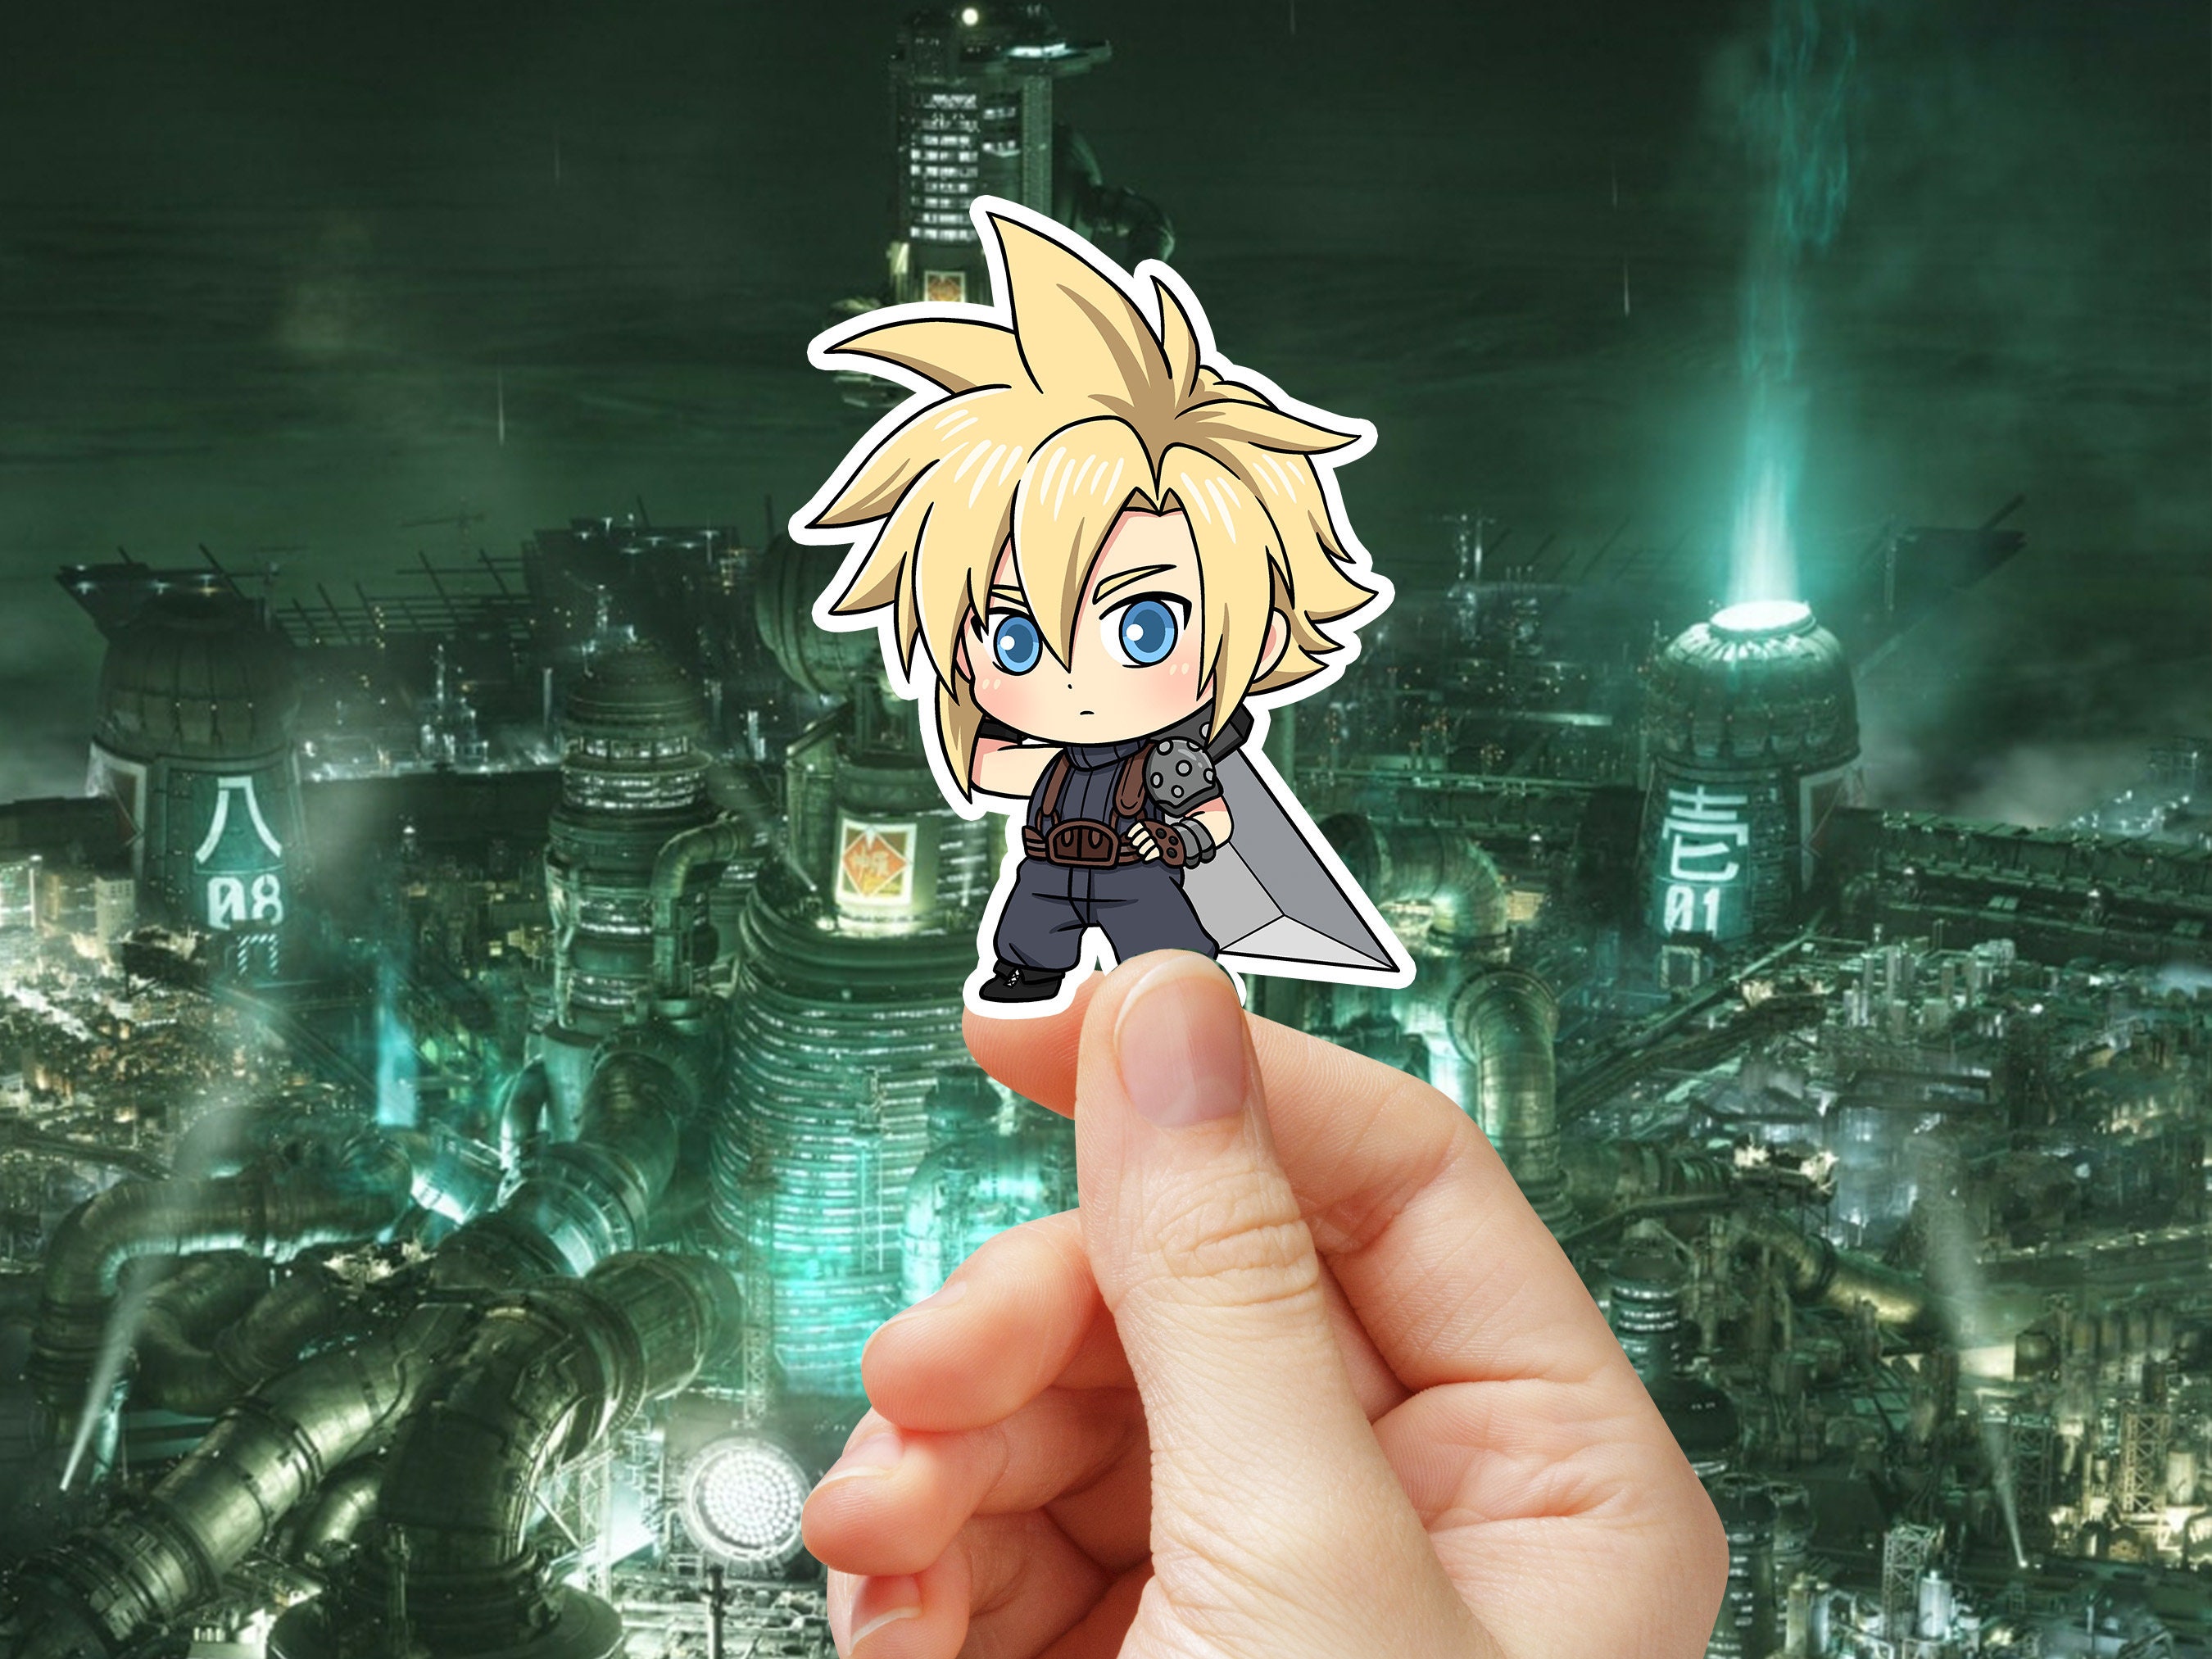 Anime Ignite   cloudstrife  By aidenjm Are you an anime artist    Get my FREE Ebook  httpbitly2Ky4zgX  wiptuesday  Cloud  Strife is the main protagonist in Final